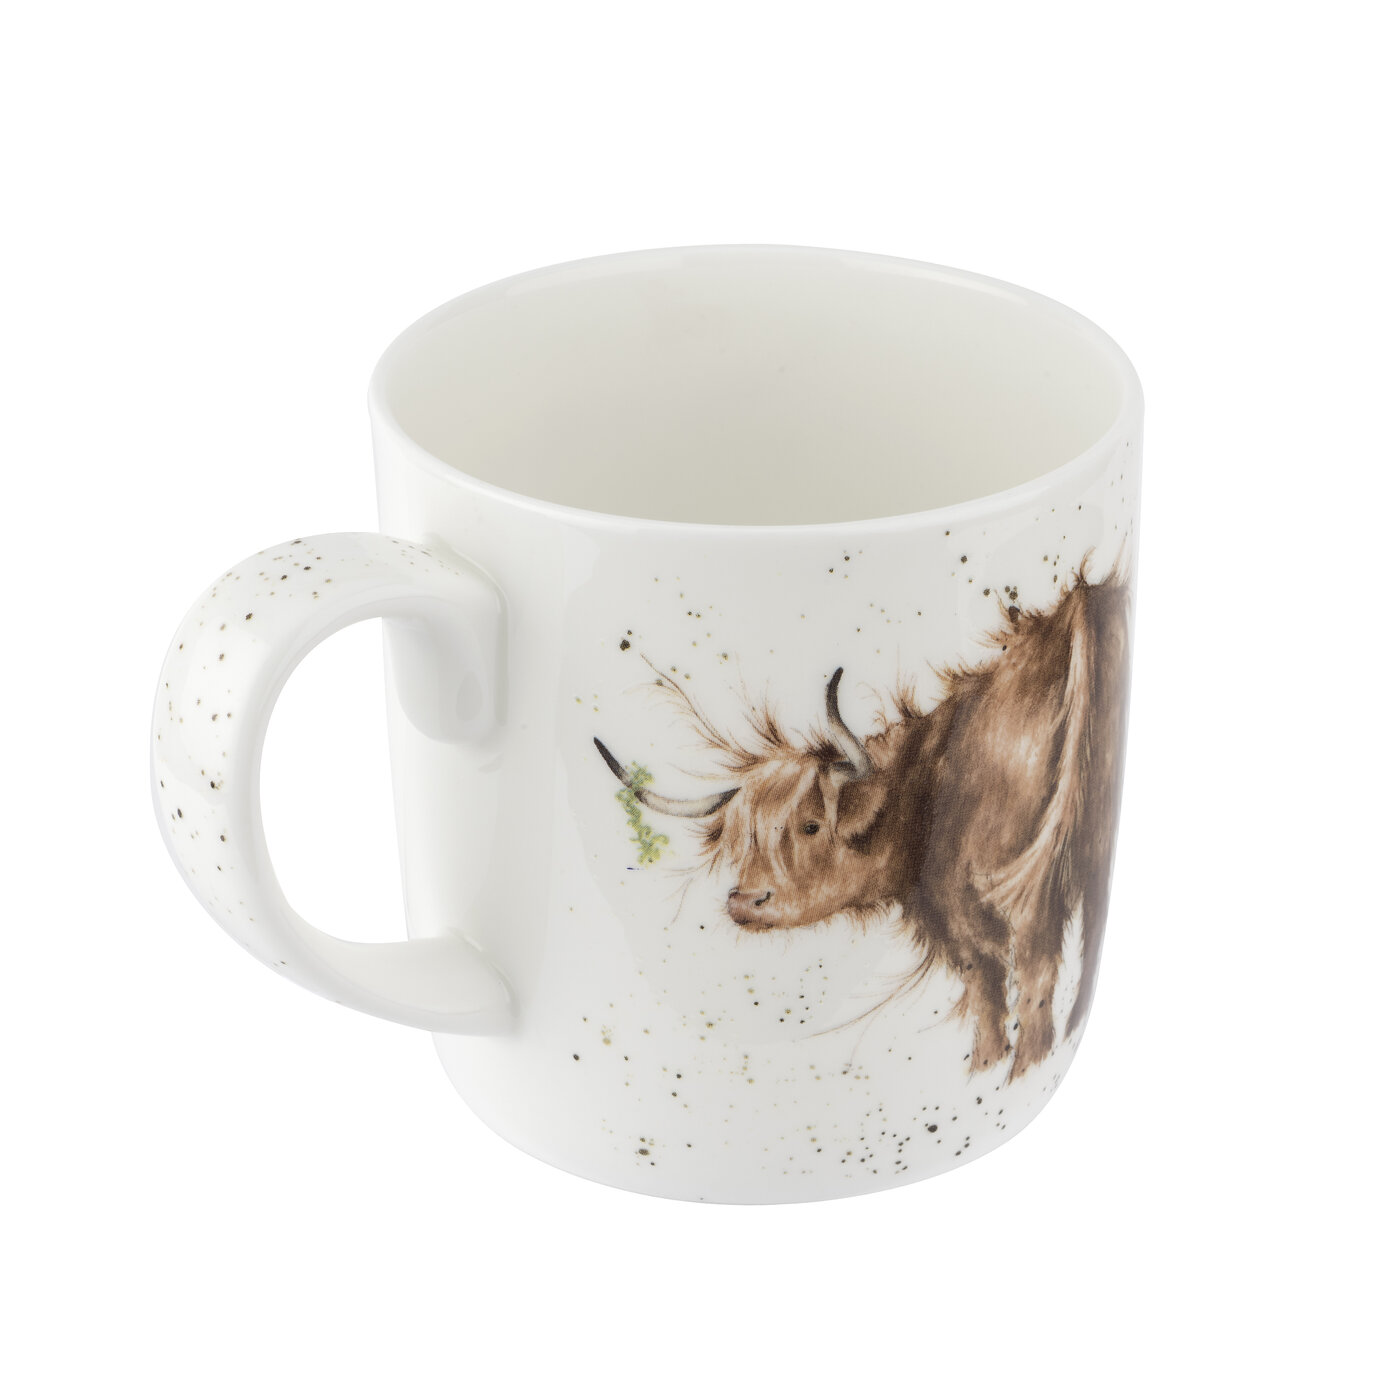 Daisy- Coo 14 Ounce Mug (Cow) image number null